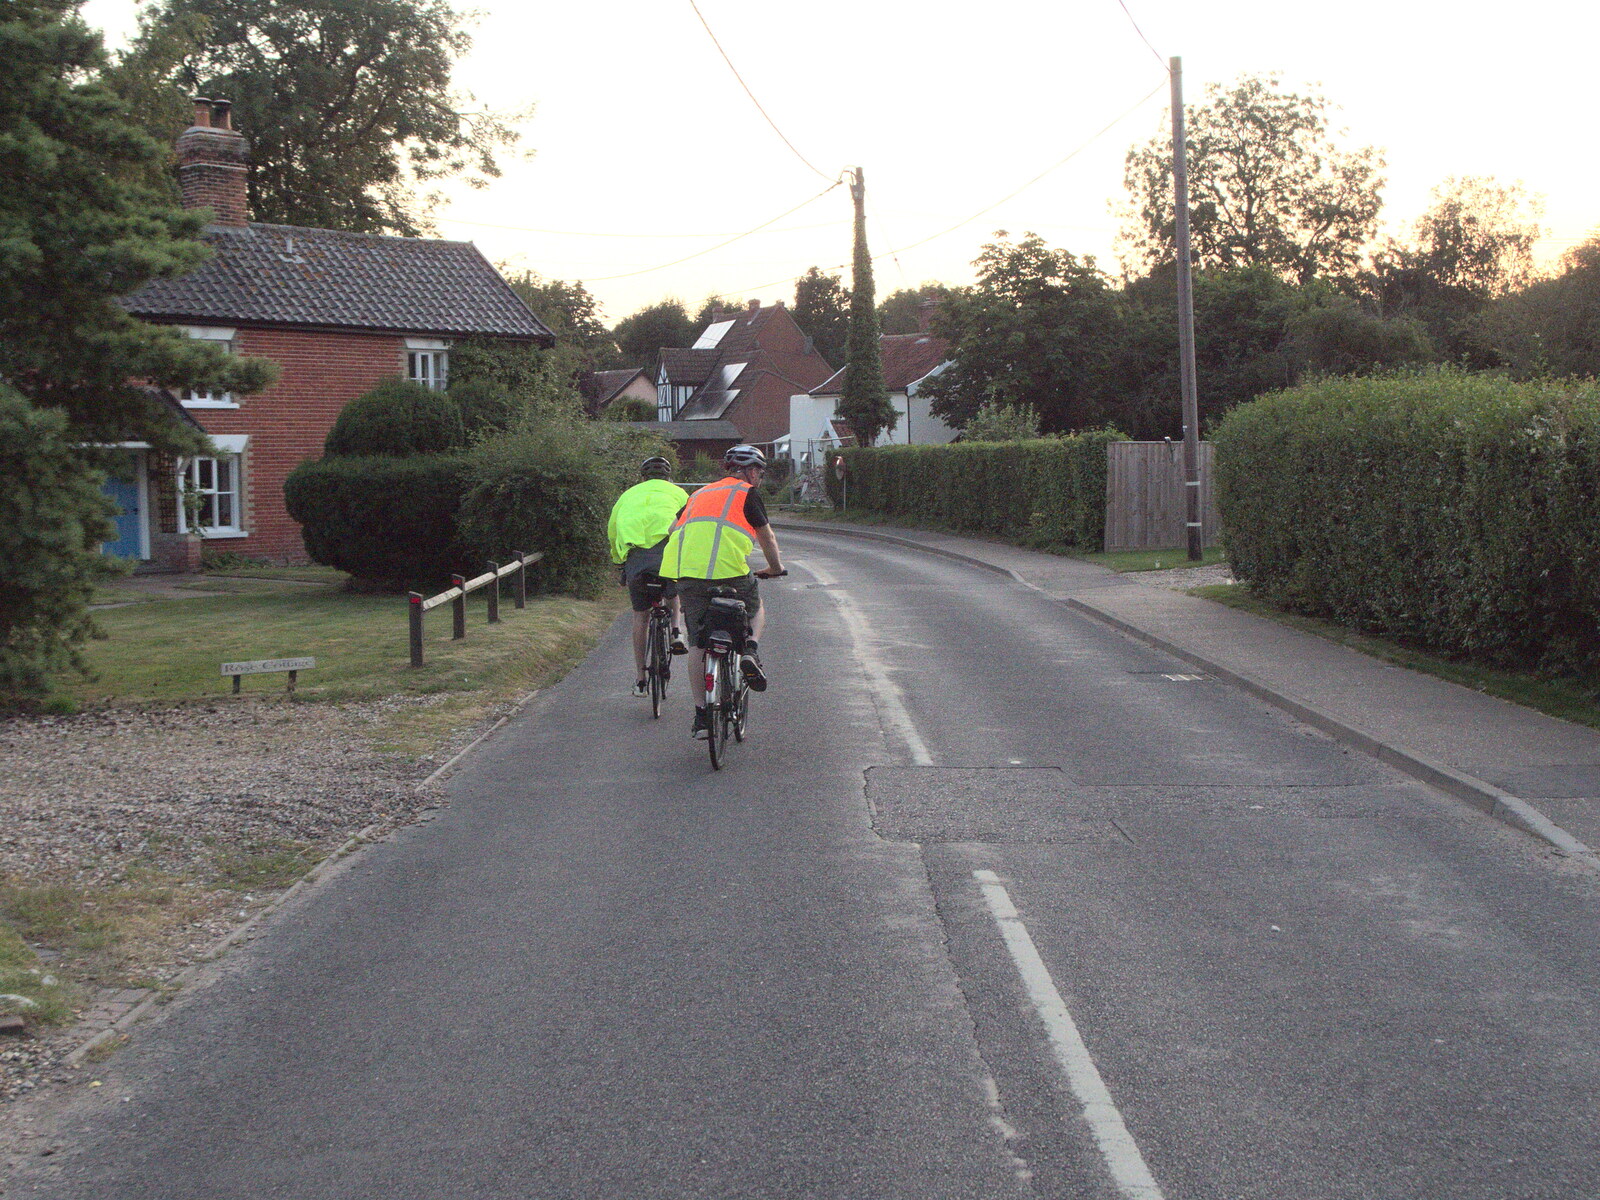 We cycle out of Burston from The BSCC at The Crown, Gissing, Norfolk - 22nd July 2021